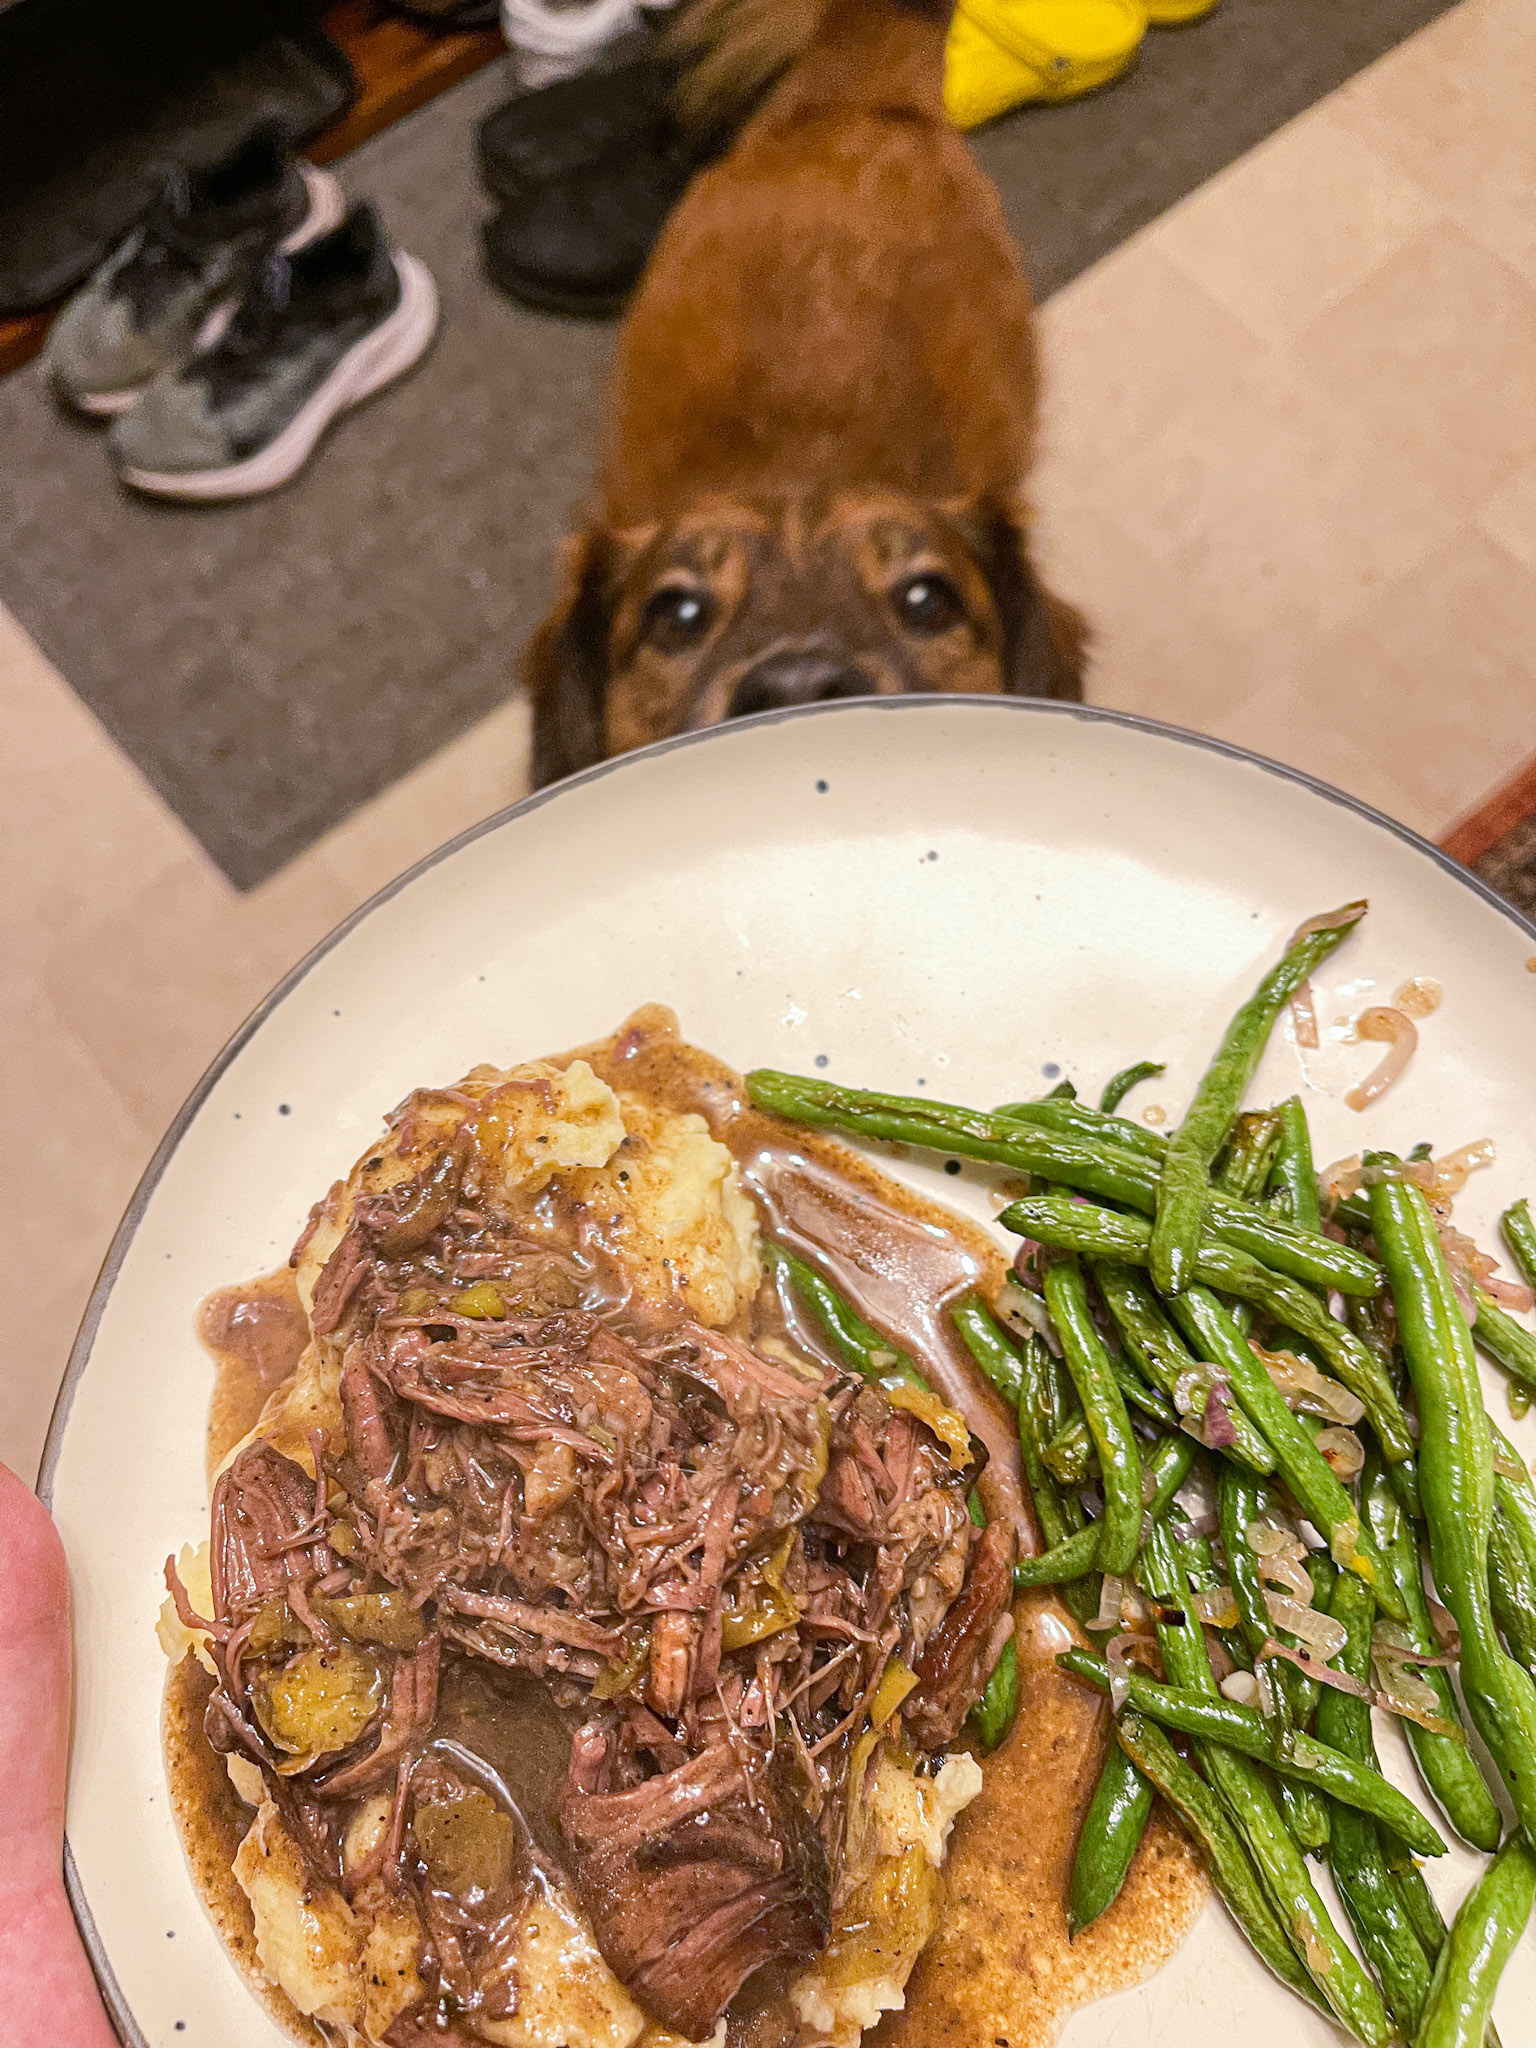 shredded meat on top of potatoes with green beans and dog looking at the food